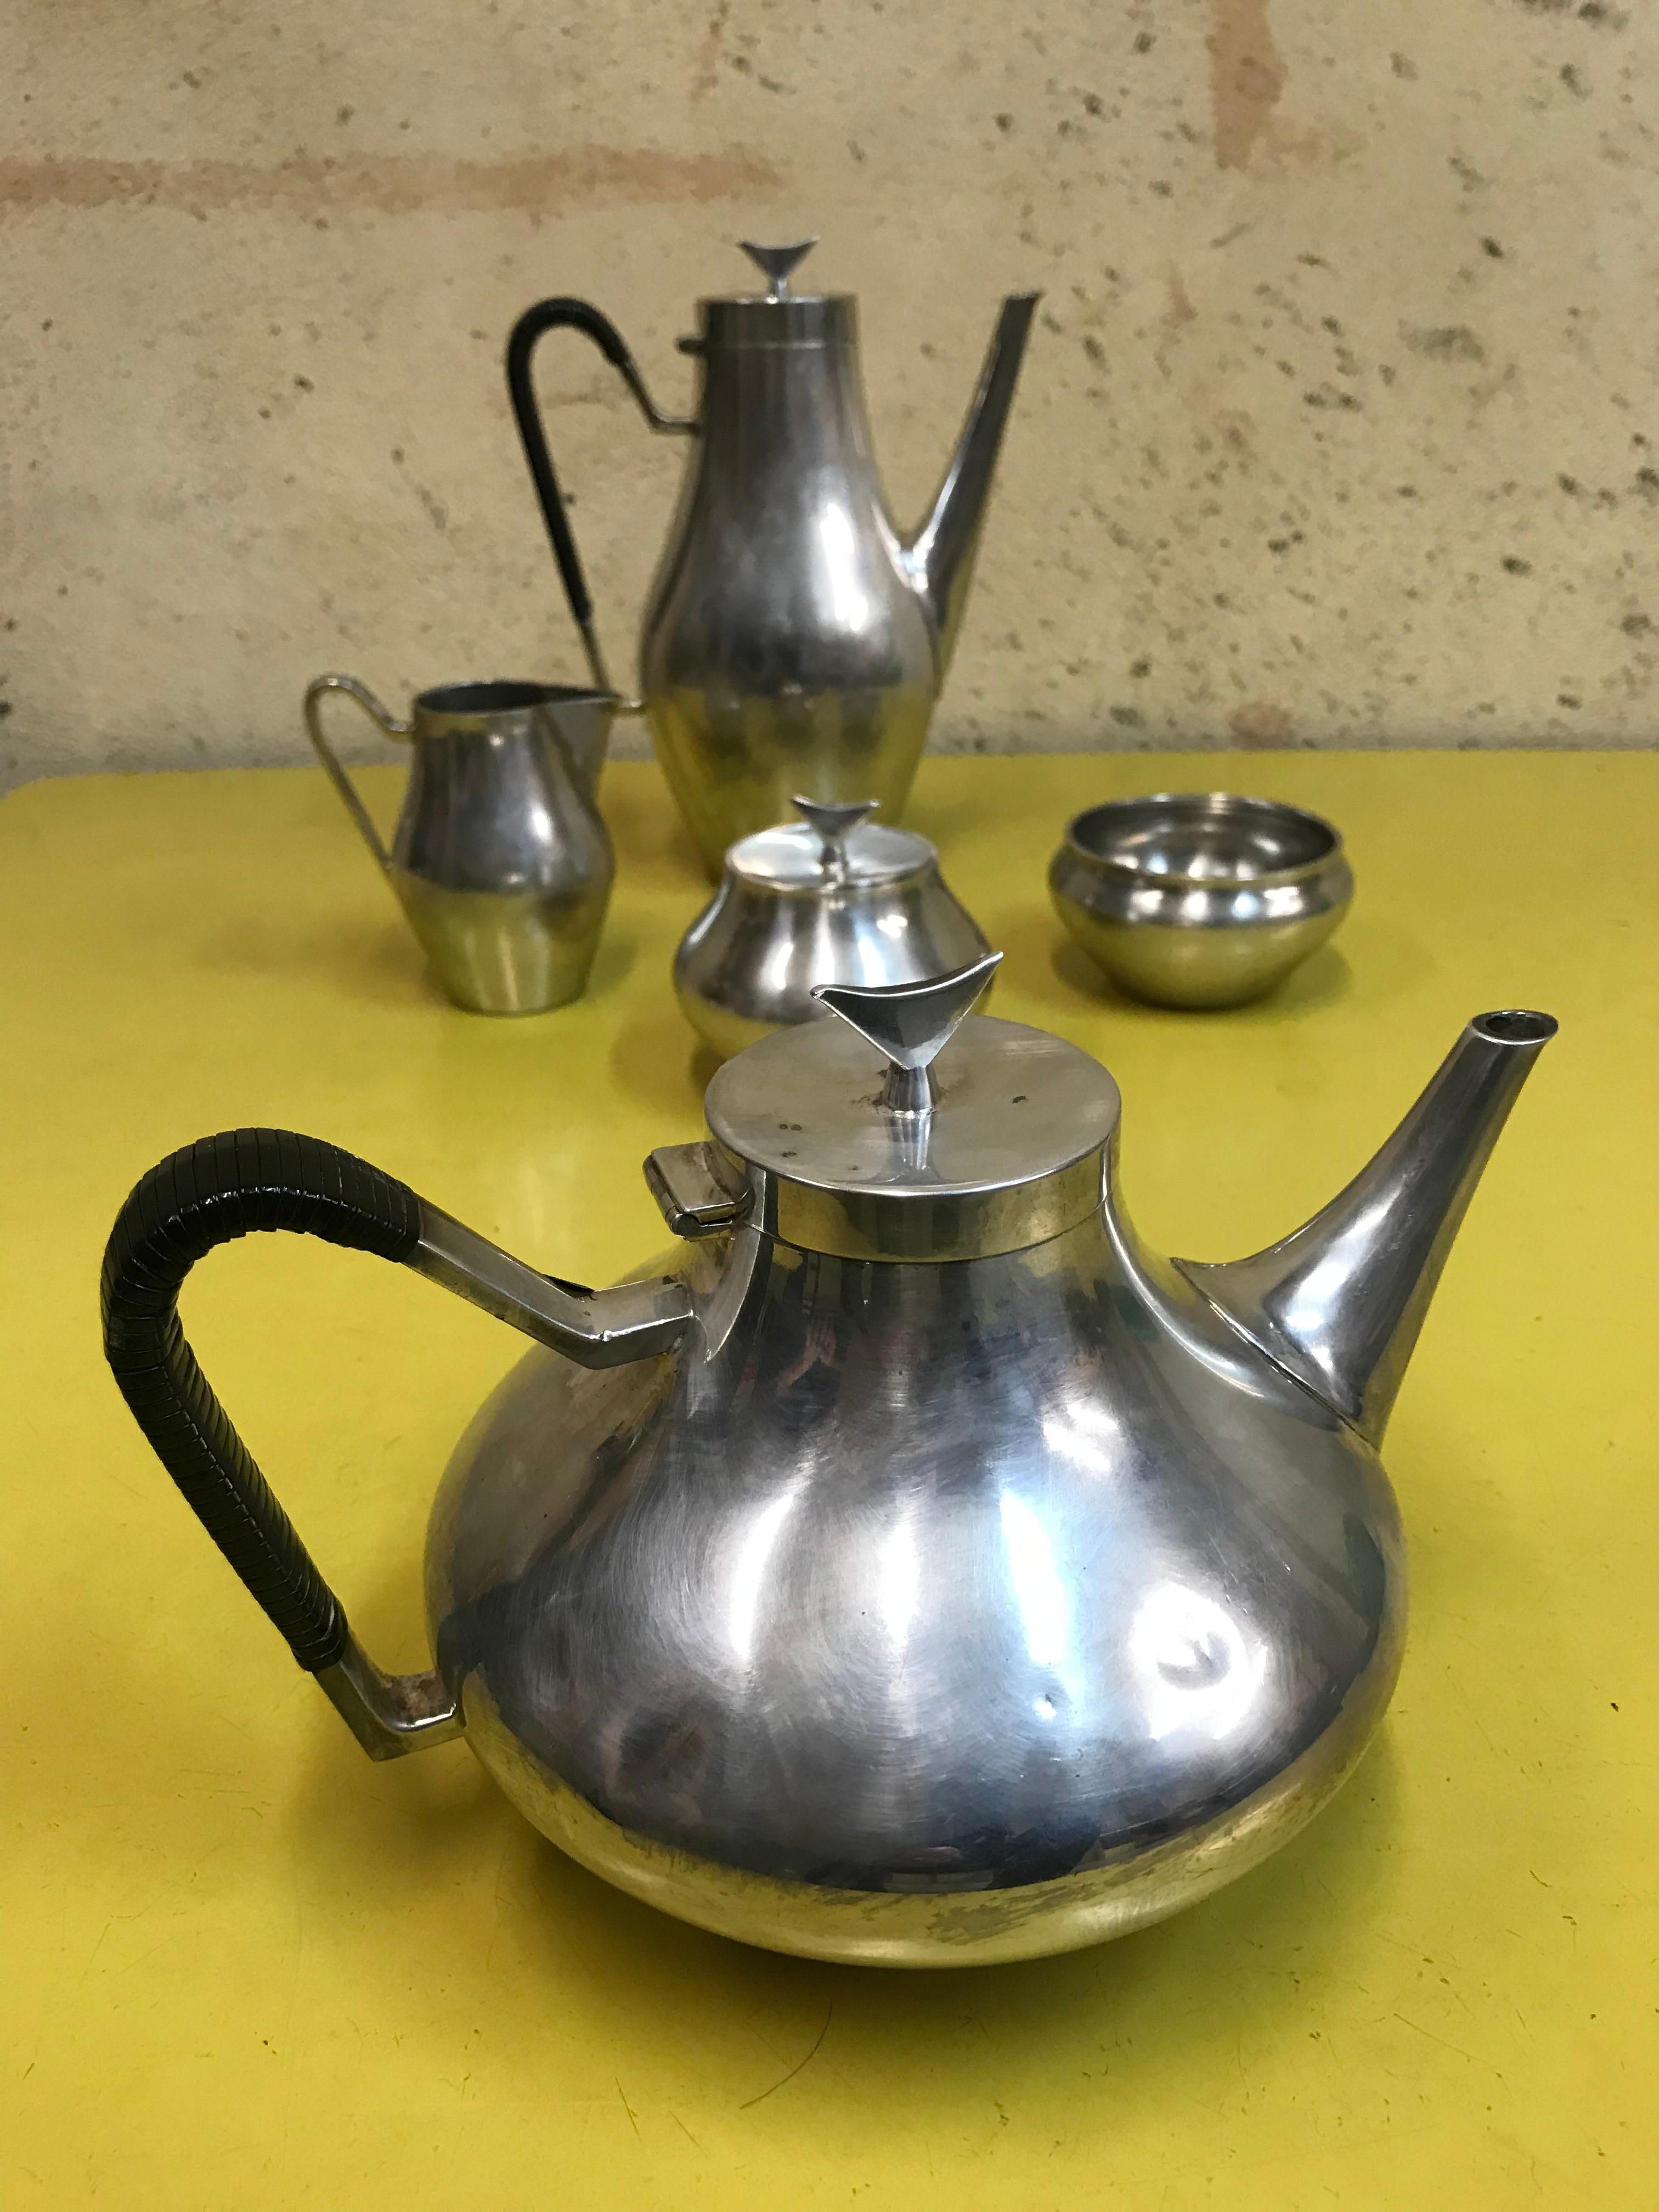 Exceptional Denmark by Reed and Barton silver plate 5-piece tea set 
1 - coffee pot:
1 - tea pot:
1 - sugar (with lid):
1 - creamer:
1 - second bowl( no lid).
   